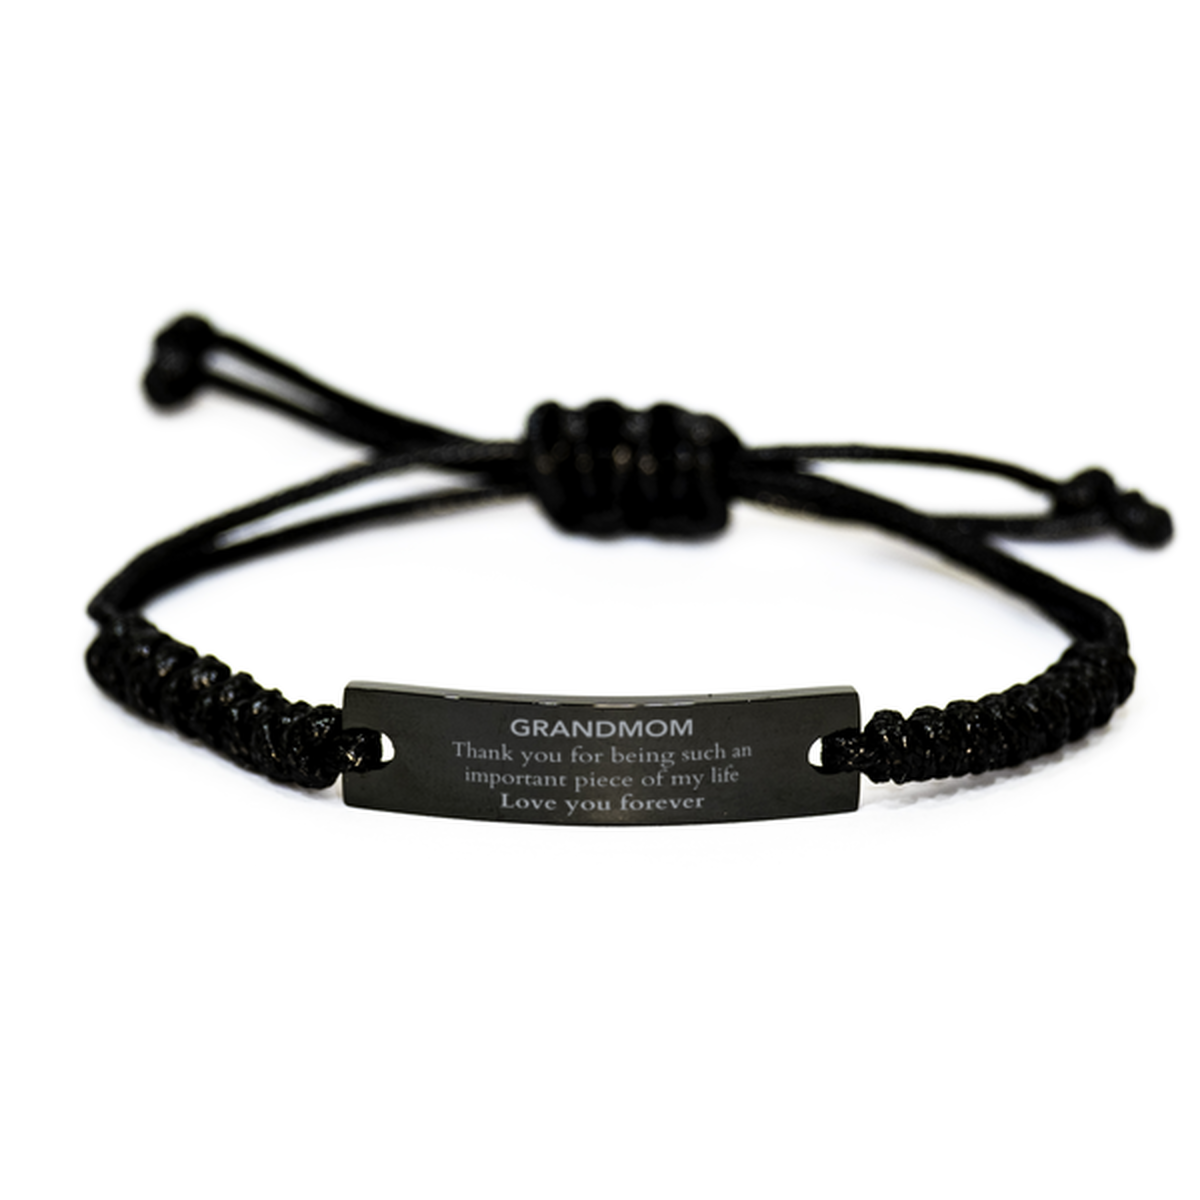 Appropriate Grandmom Black Rope Bracelet Epic Birthday Gifts for Grandmom Thank you for being such an important piece of my life Grandmom Christmas Mothers Fathers Day